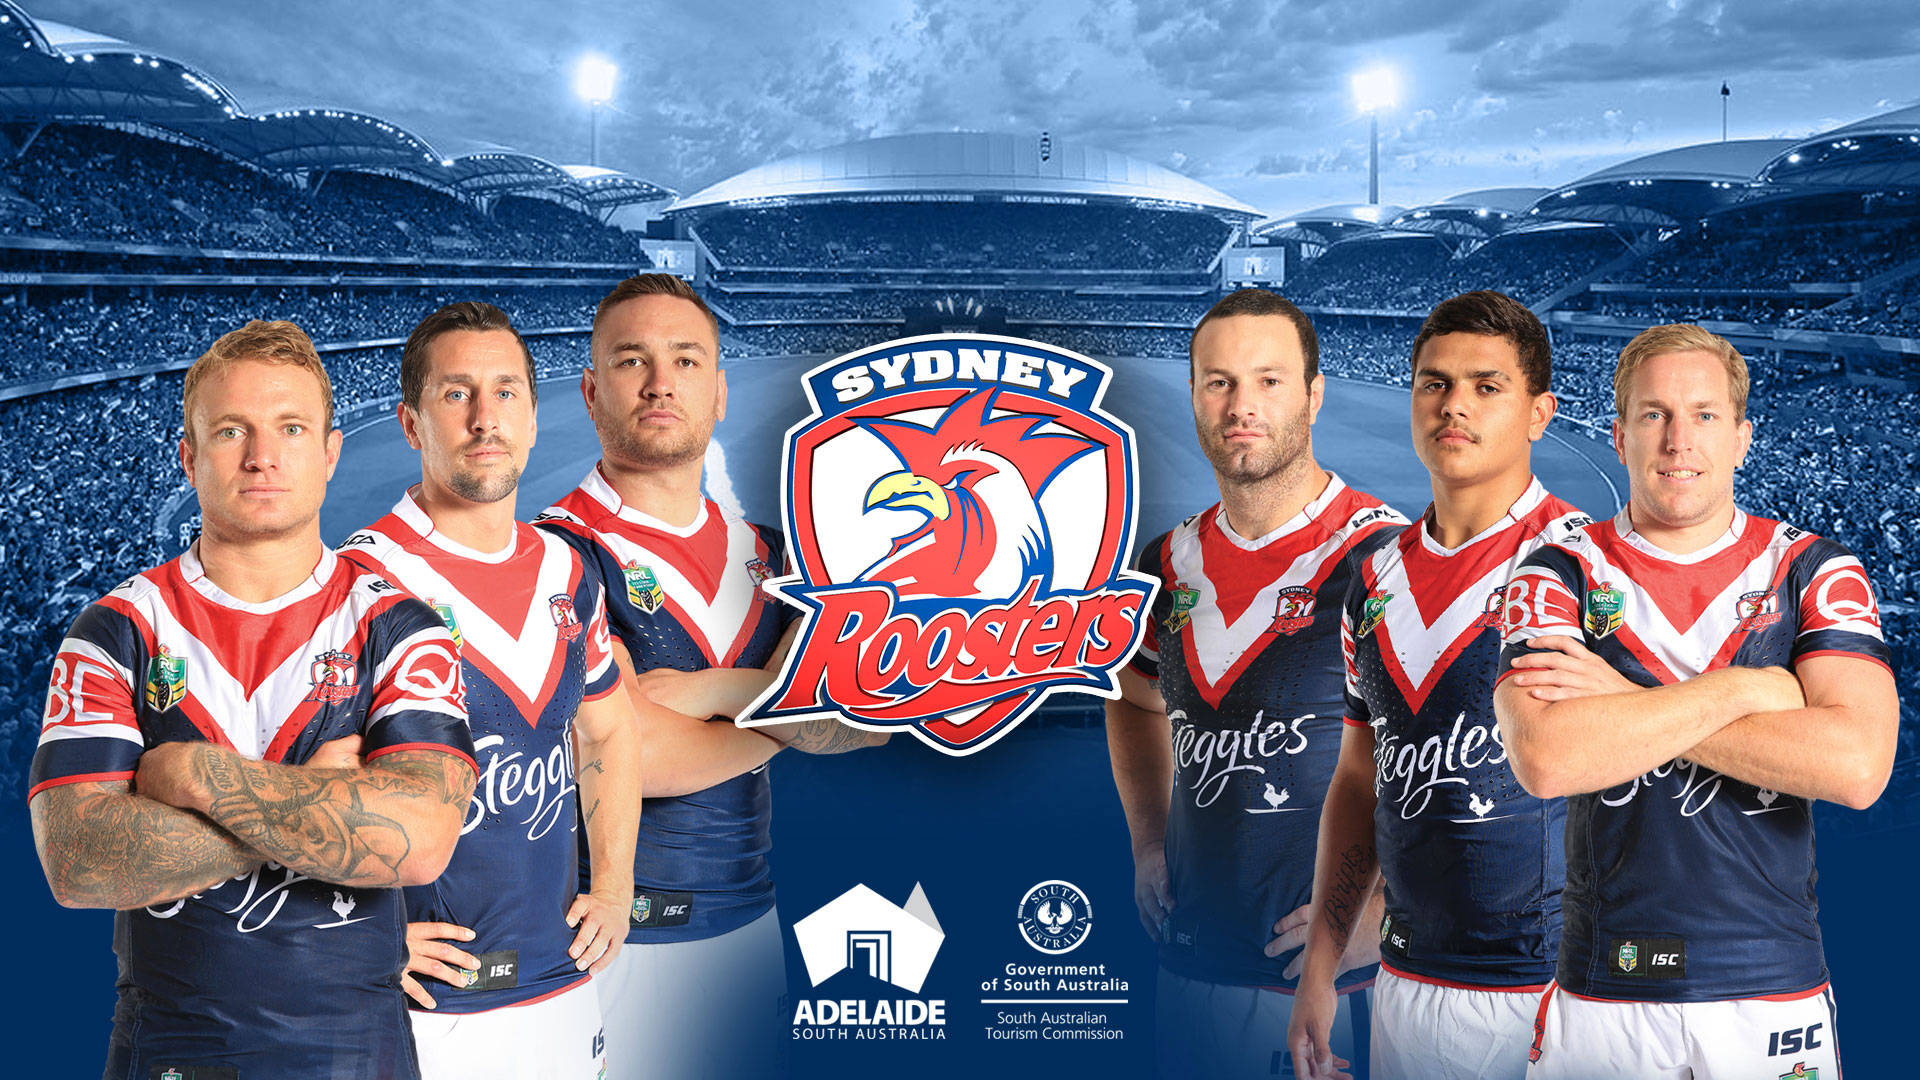 The Sydney Roosters Of NRL Wallpaper